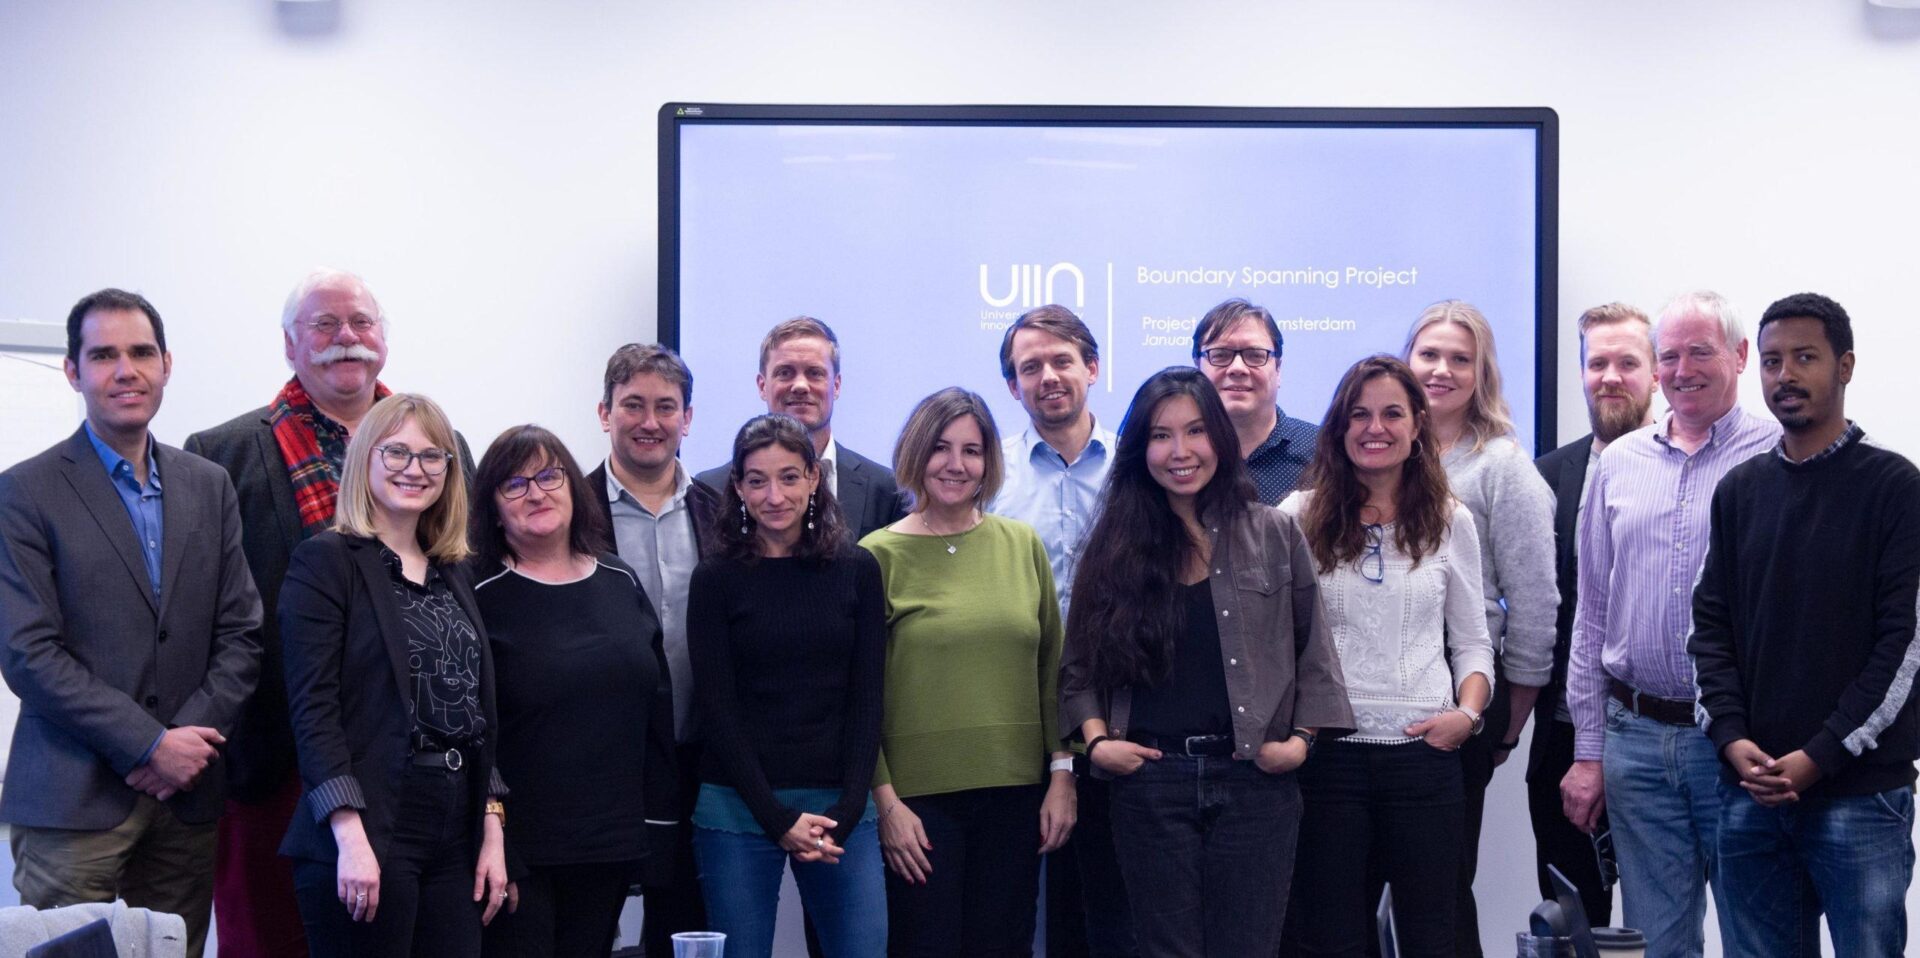 CASE: Crazy Town is Spanning Boundaries in Europe to help connect universities and businesses